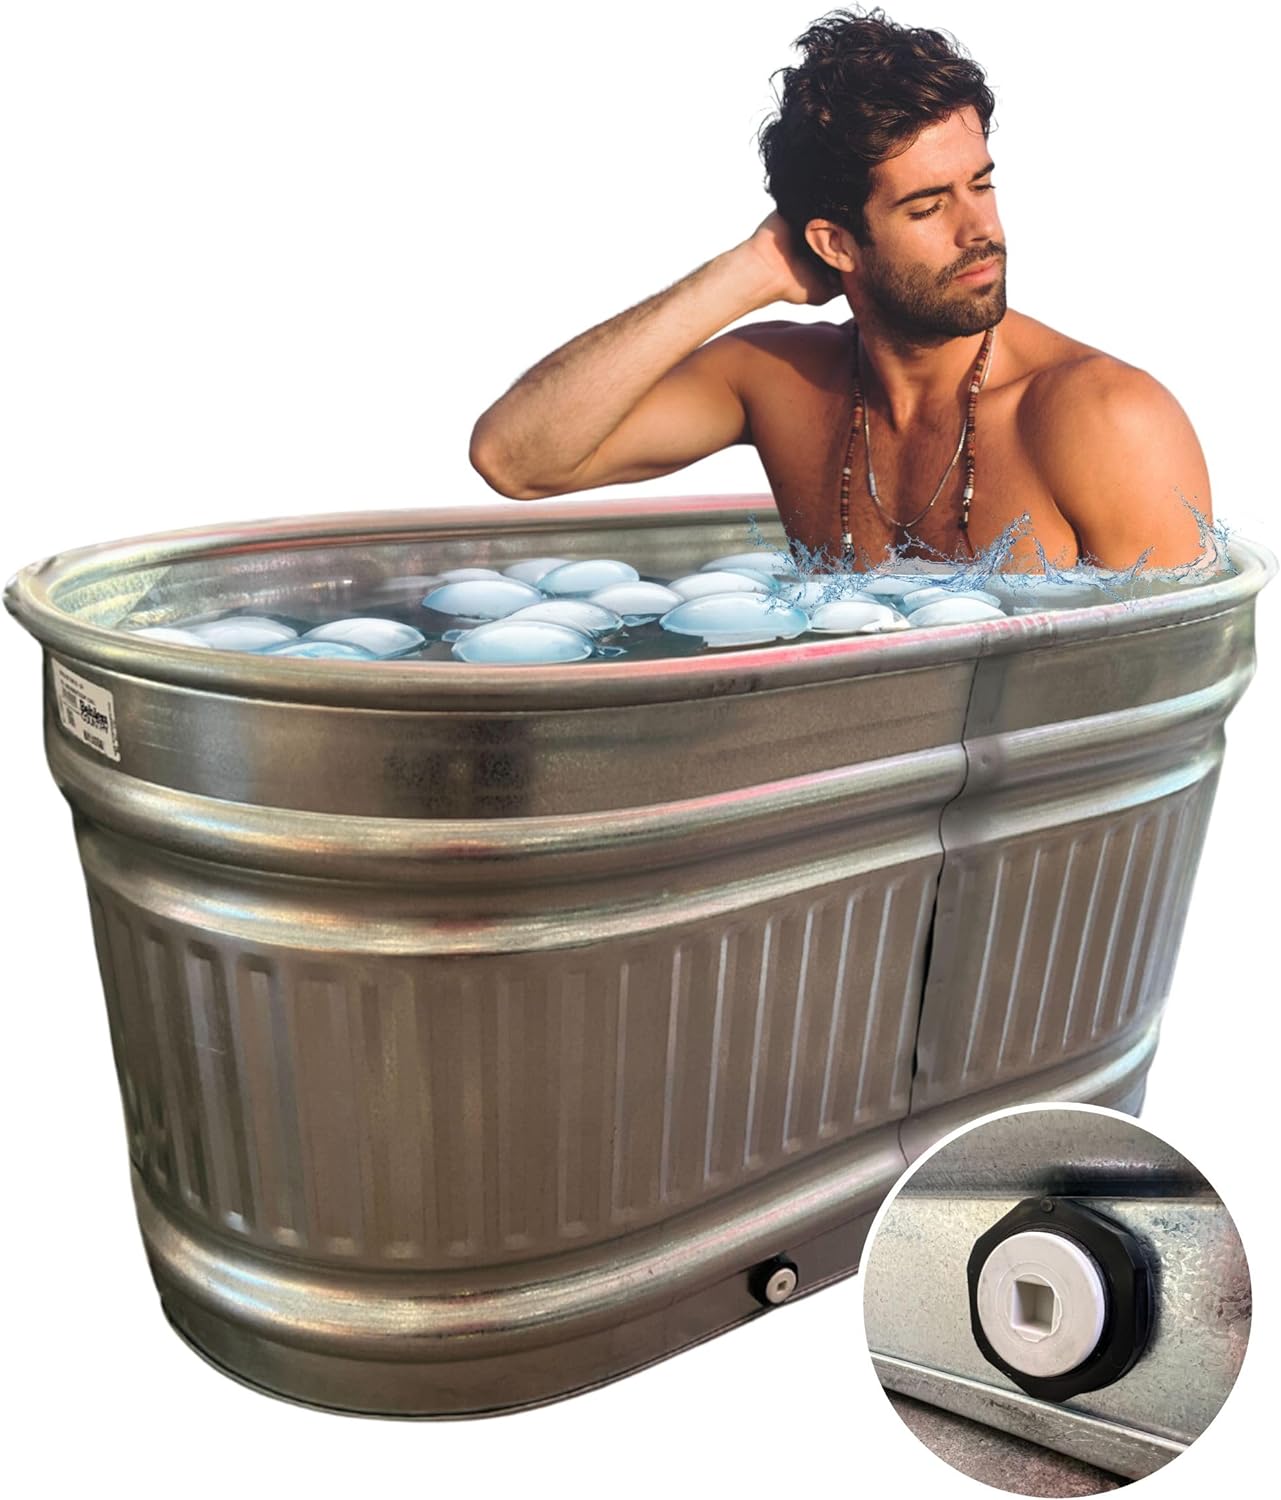 Extra Large Cold Plunge Tub for Athletes - Portable Ice Bath Barrel for  Cold Therapy, Premium Outdoor Tub - USA Owned Business